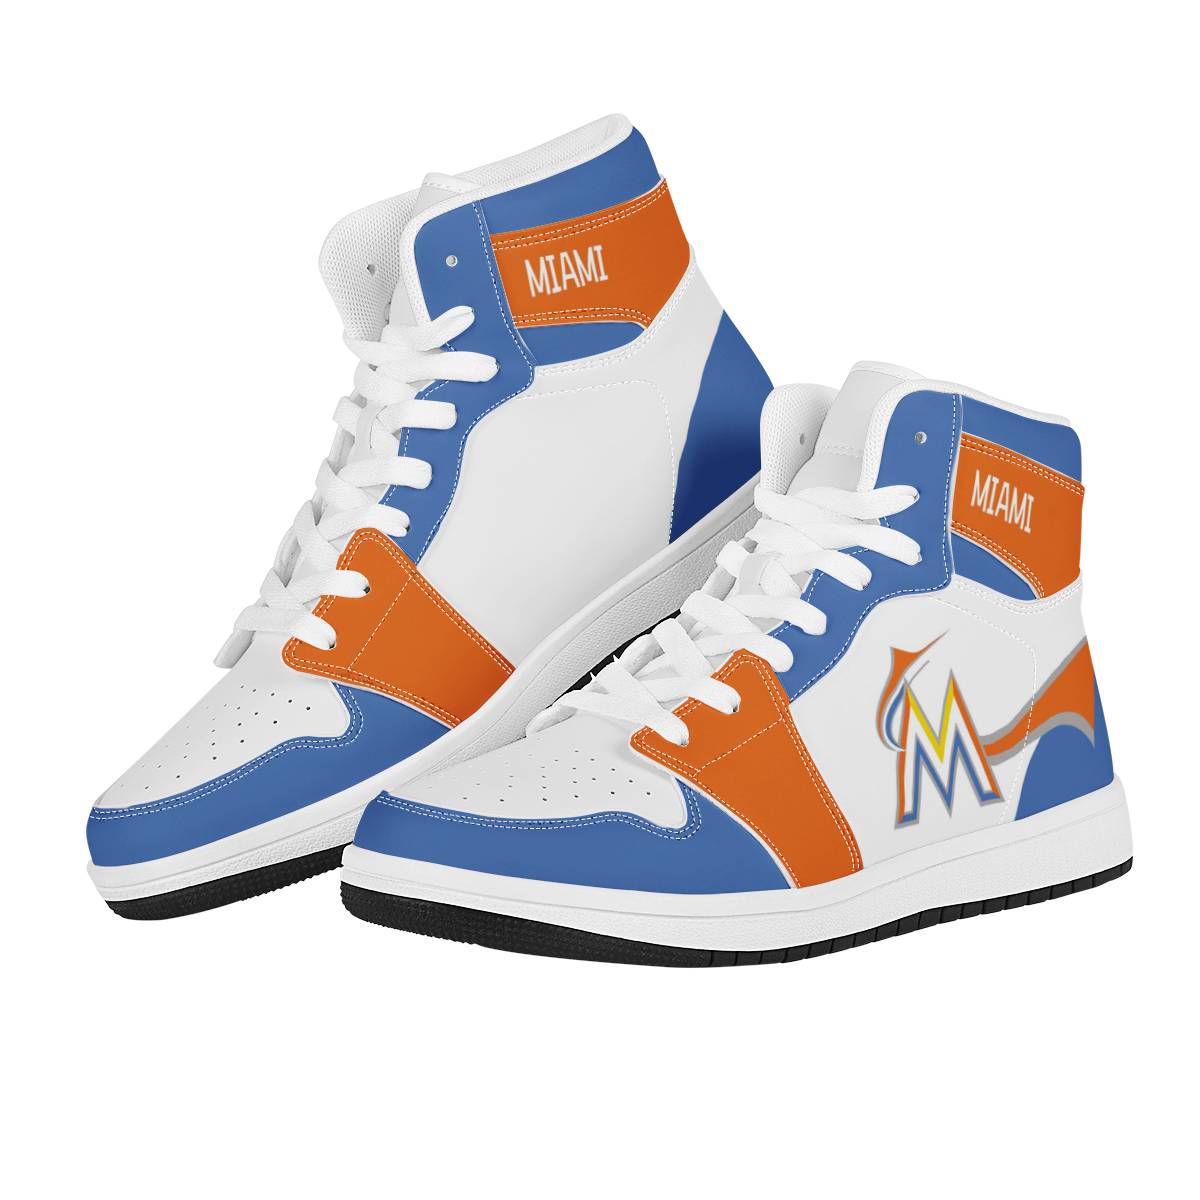 Women's Miami Marlins High Top Leather AJ1 Sneakers 002